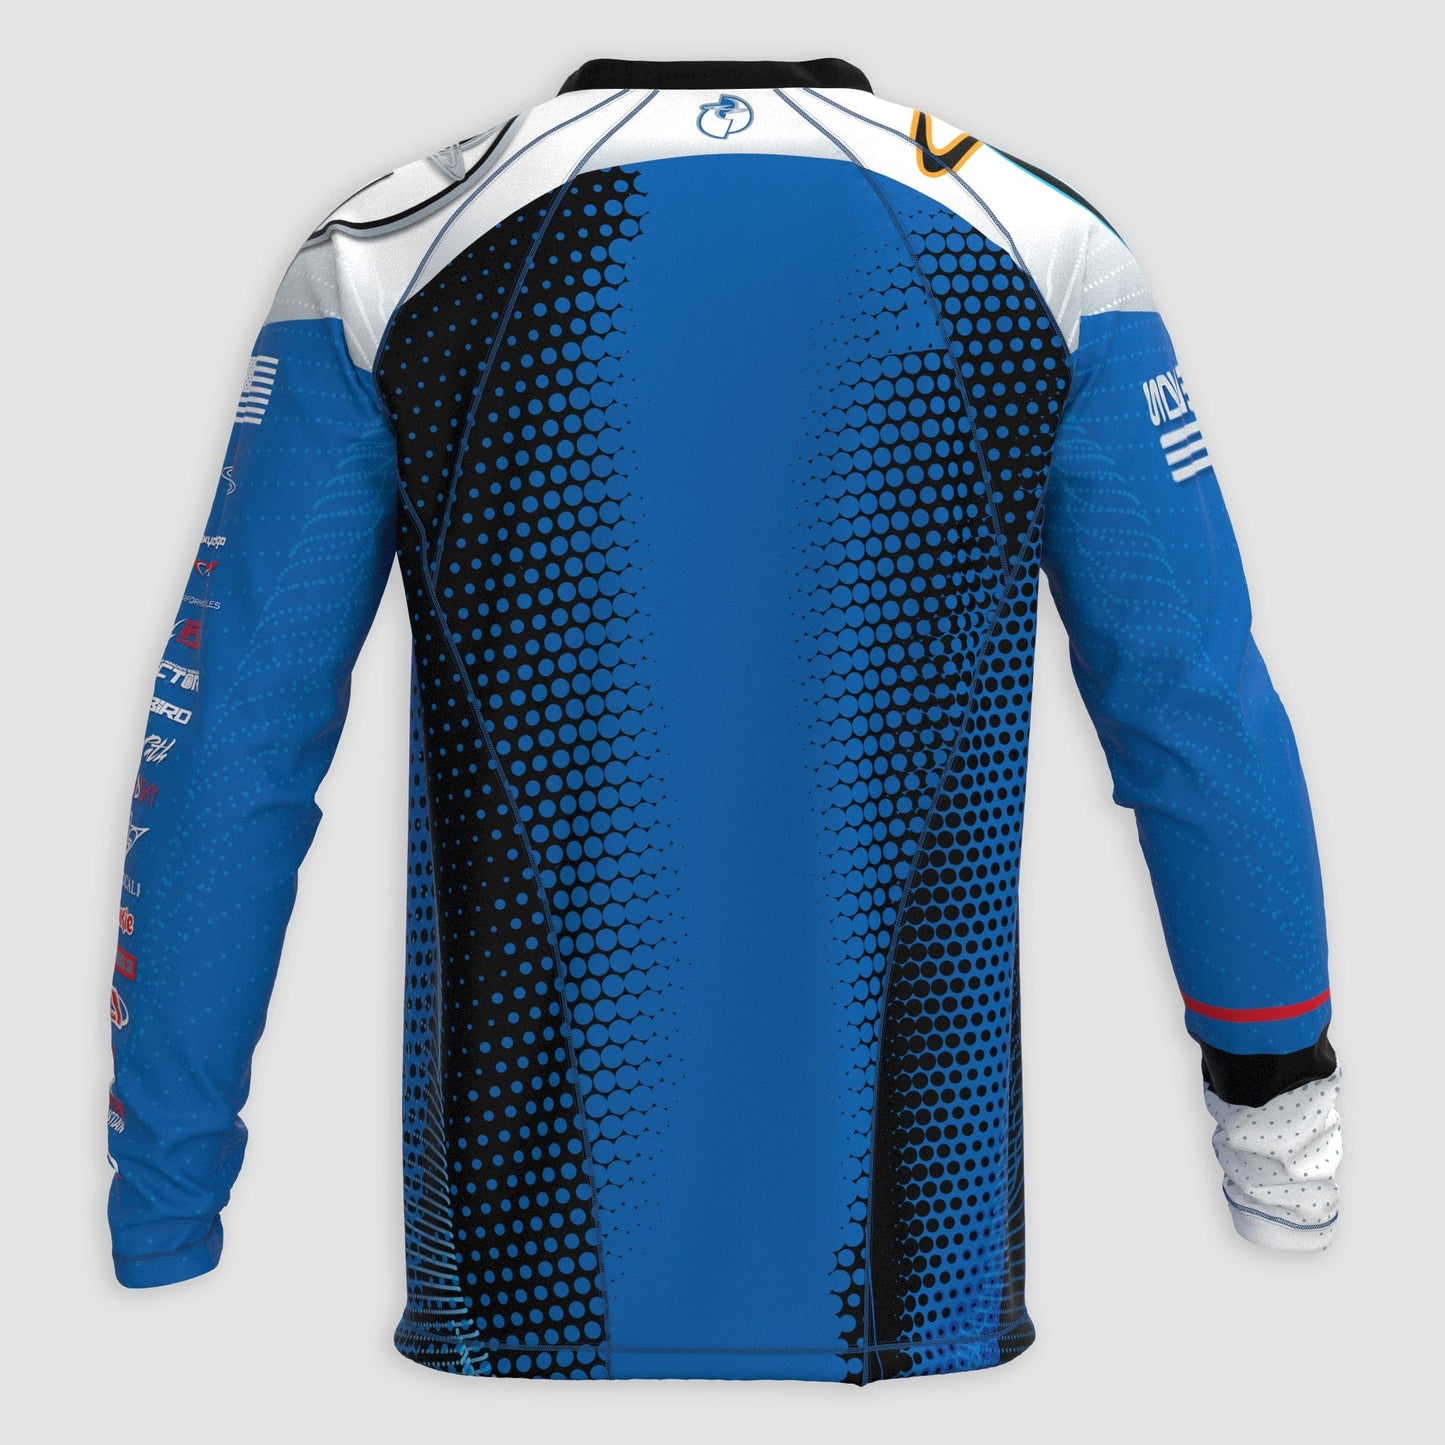 SDC CORE Physical product SDC Core Jersey